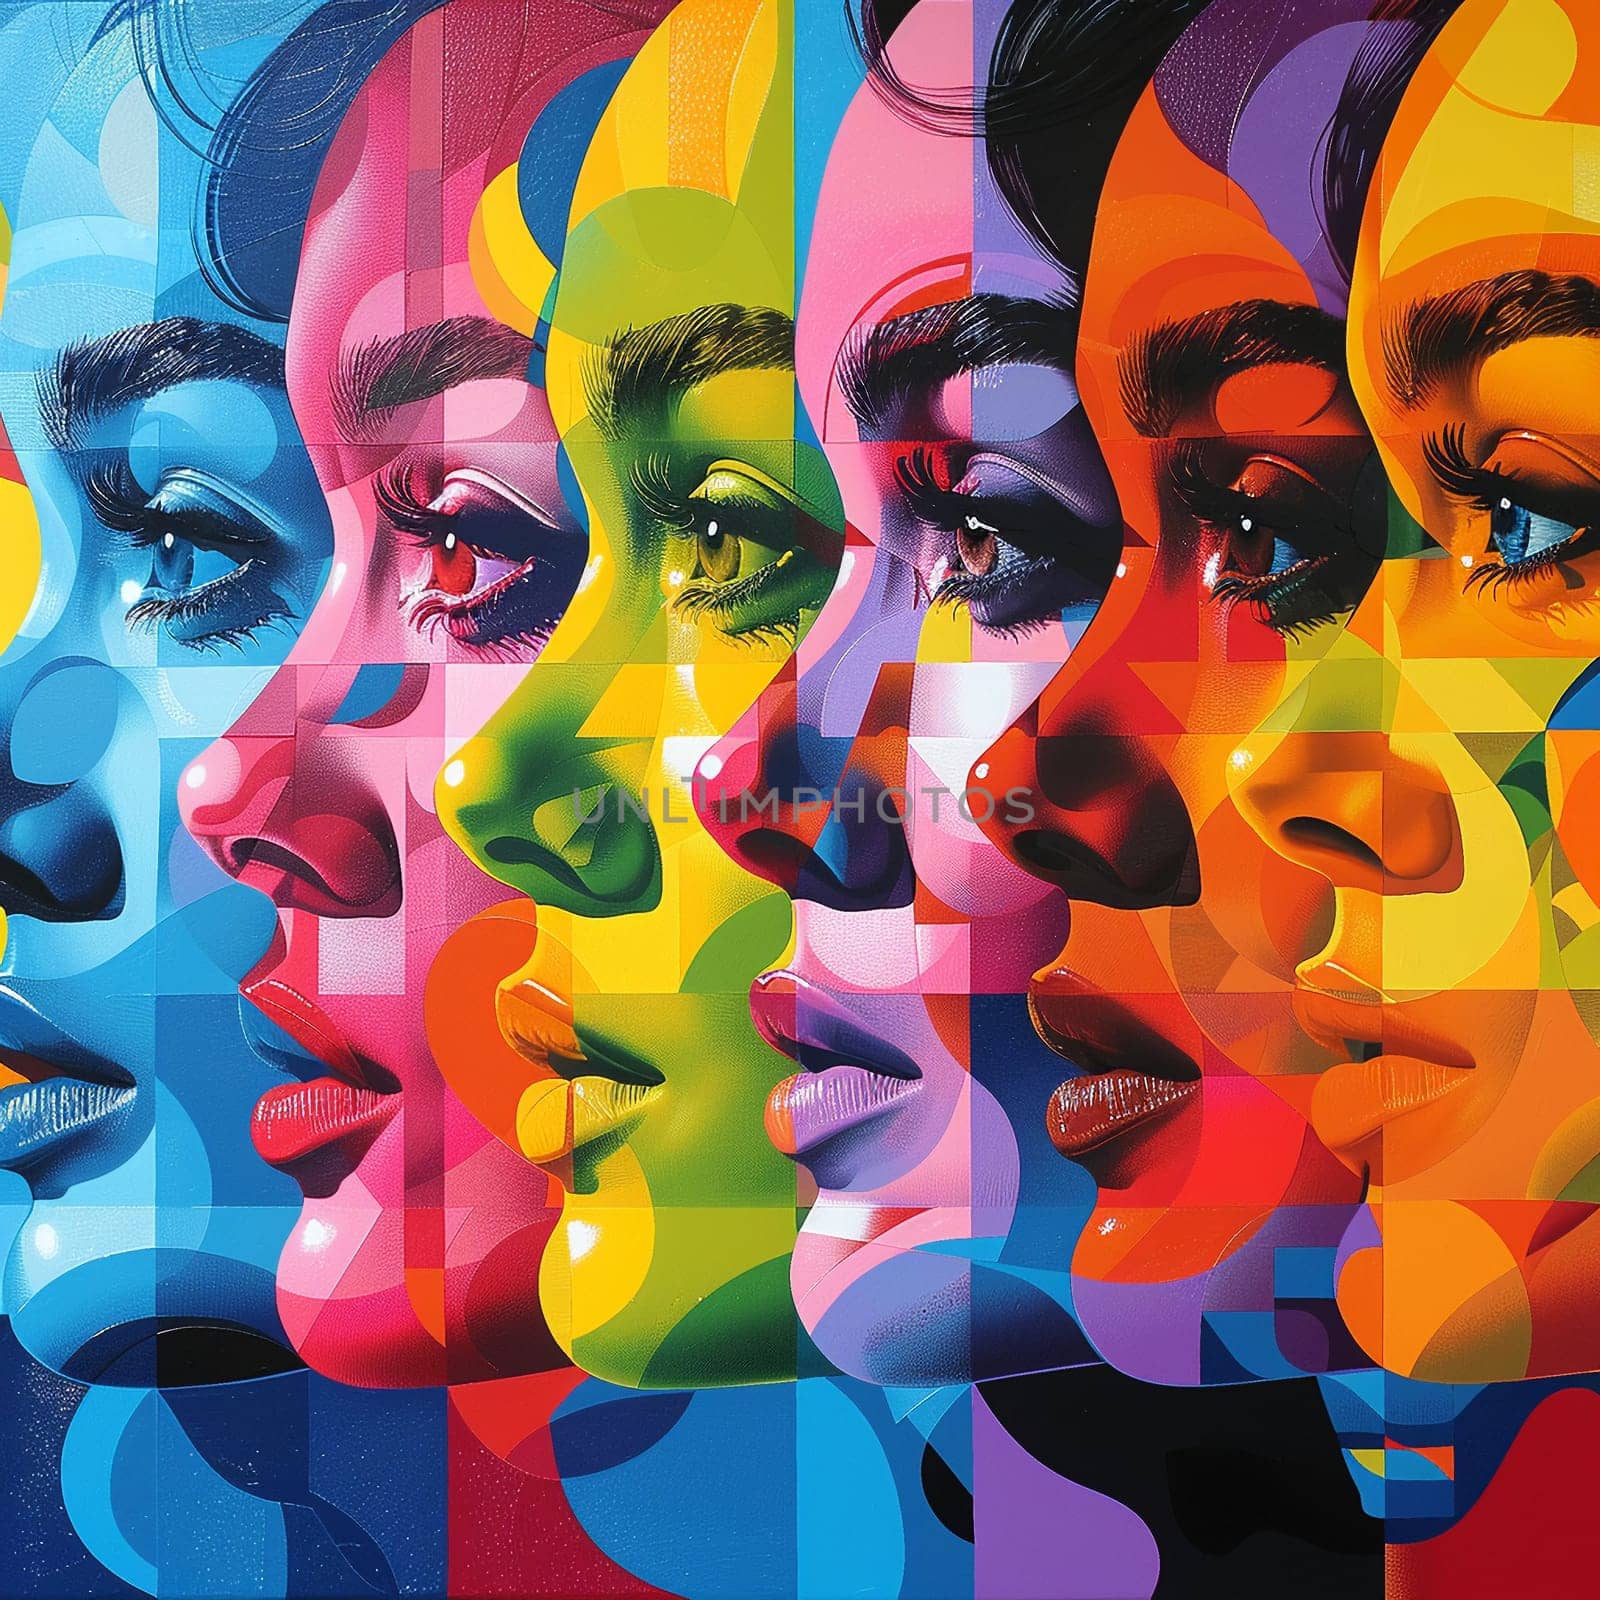 Modern pop art piece featuring iconic female figures for Womens Day. by Benzoix